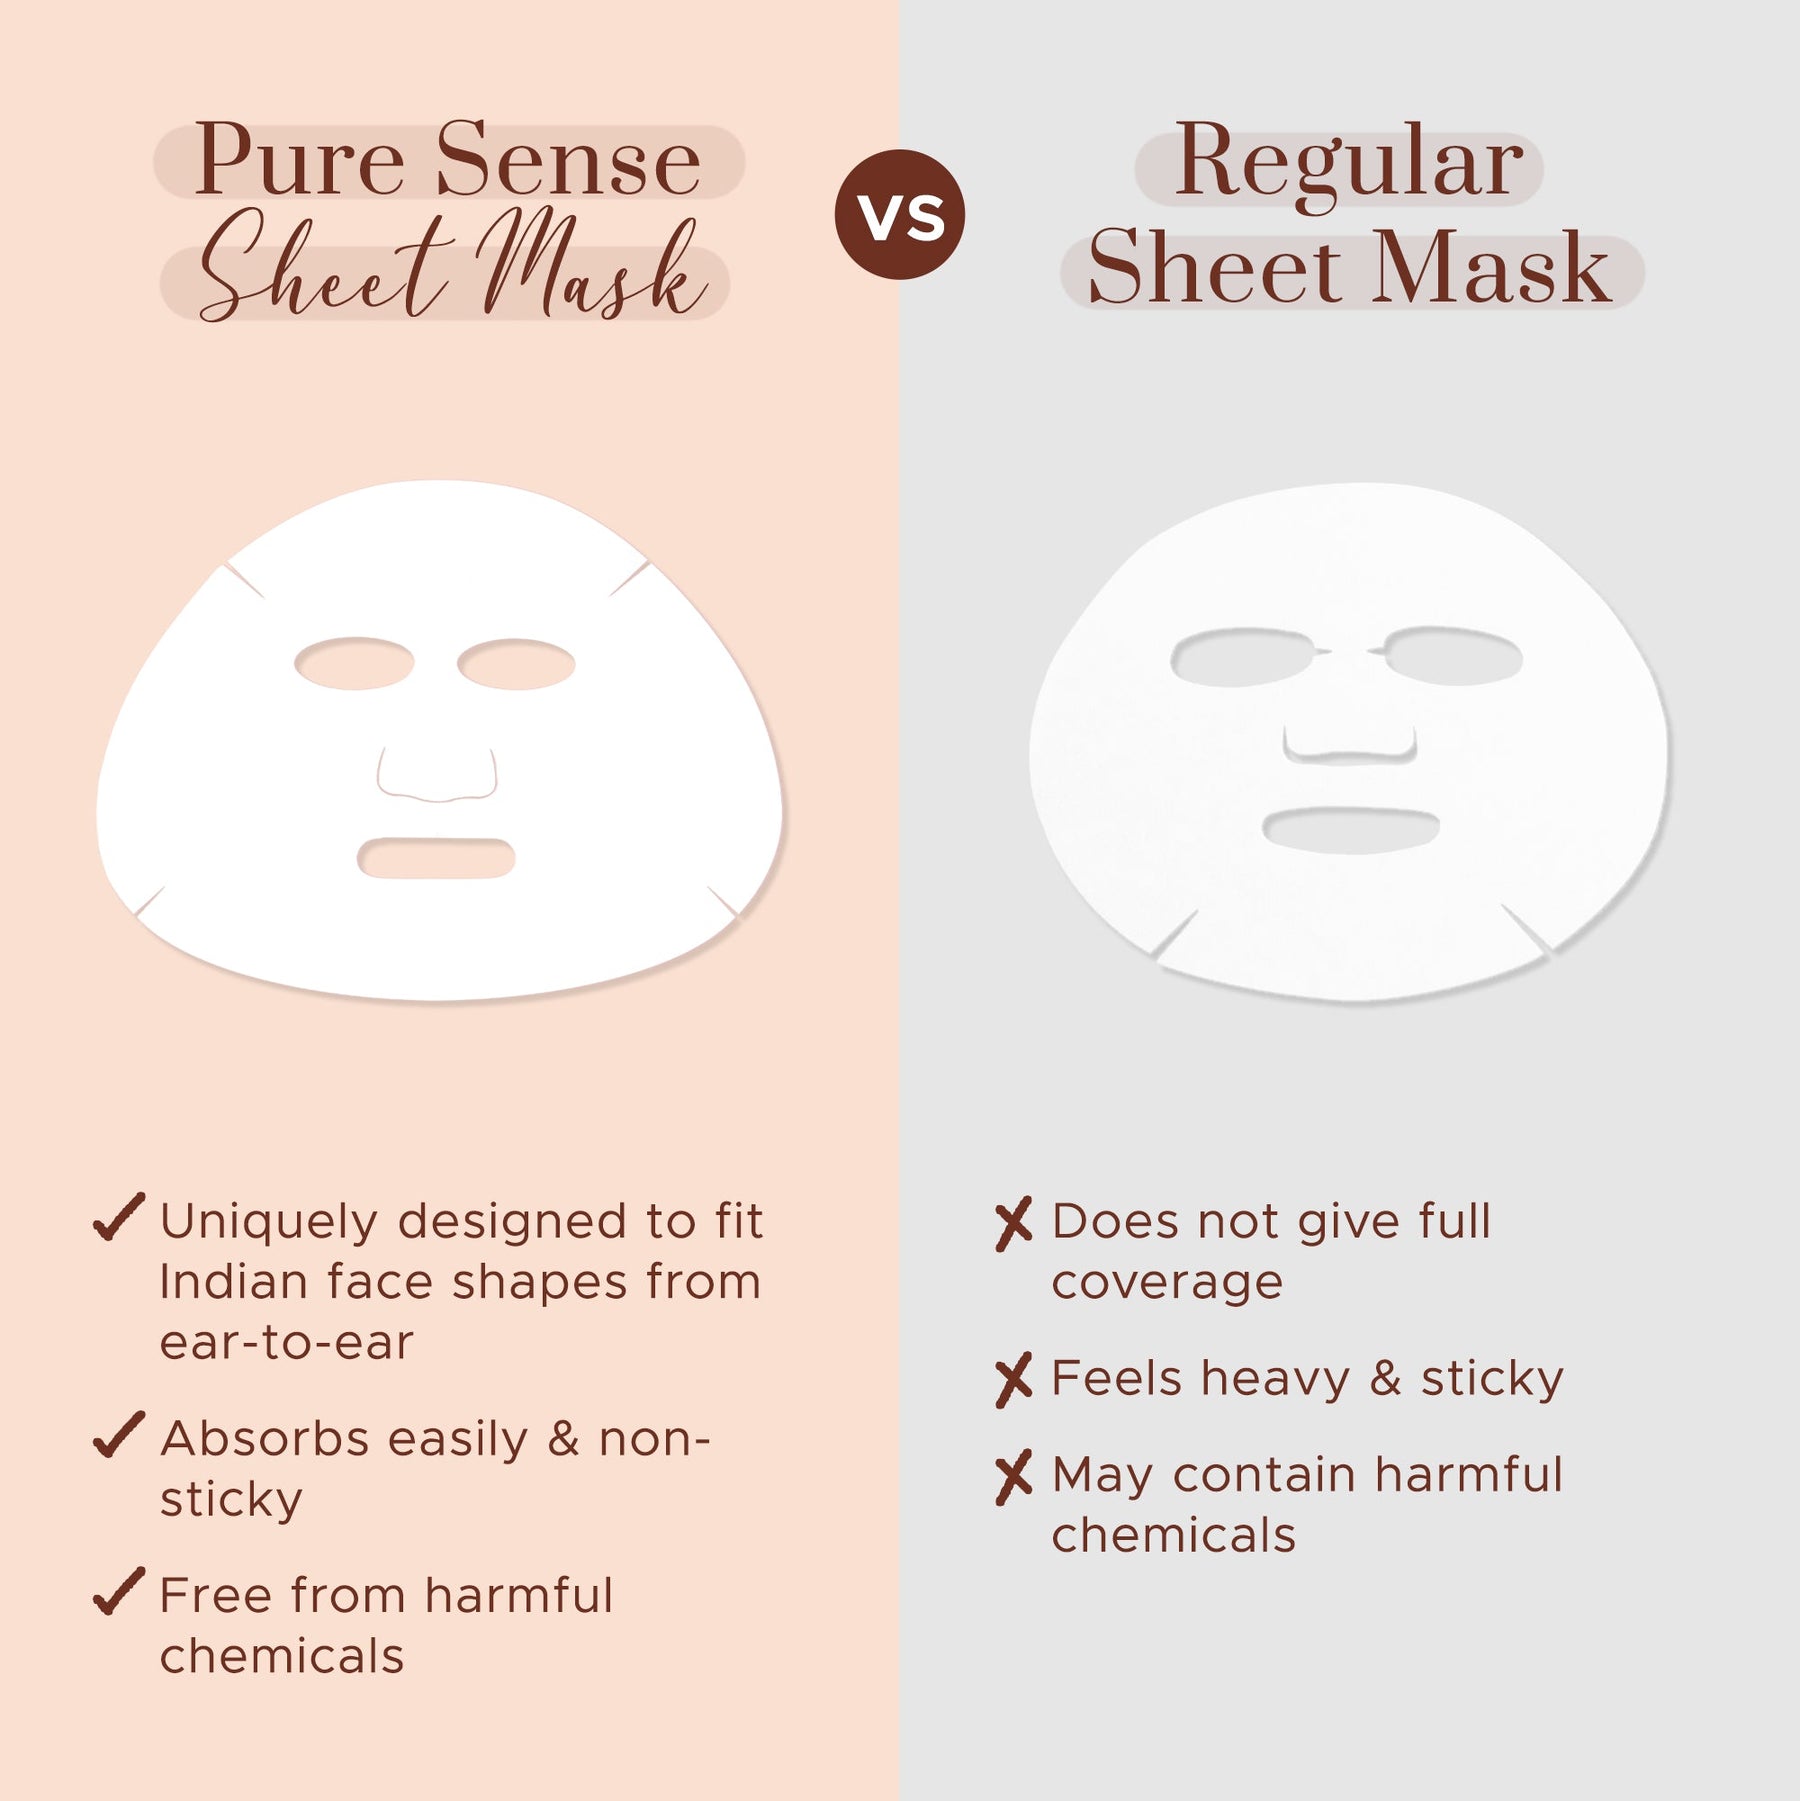 [CRED] Anti-Ageing Sheet Mask with Kakadu Plum & Avocado  |  From the makers of Parachute Advansed | 15ml